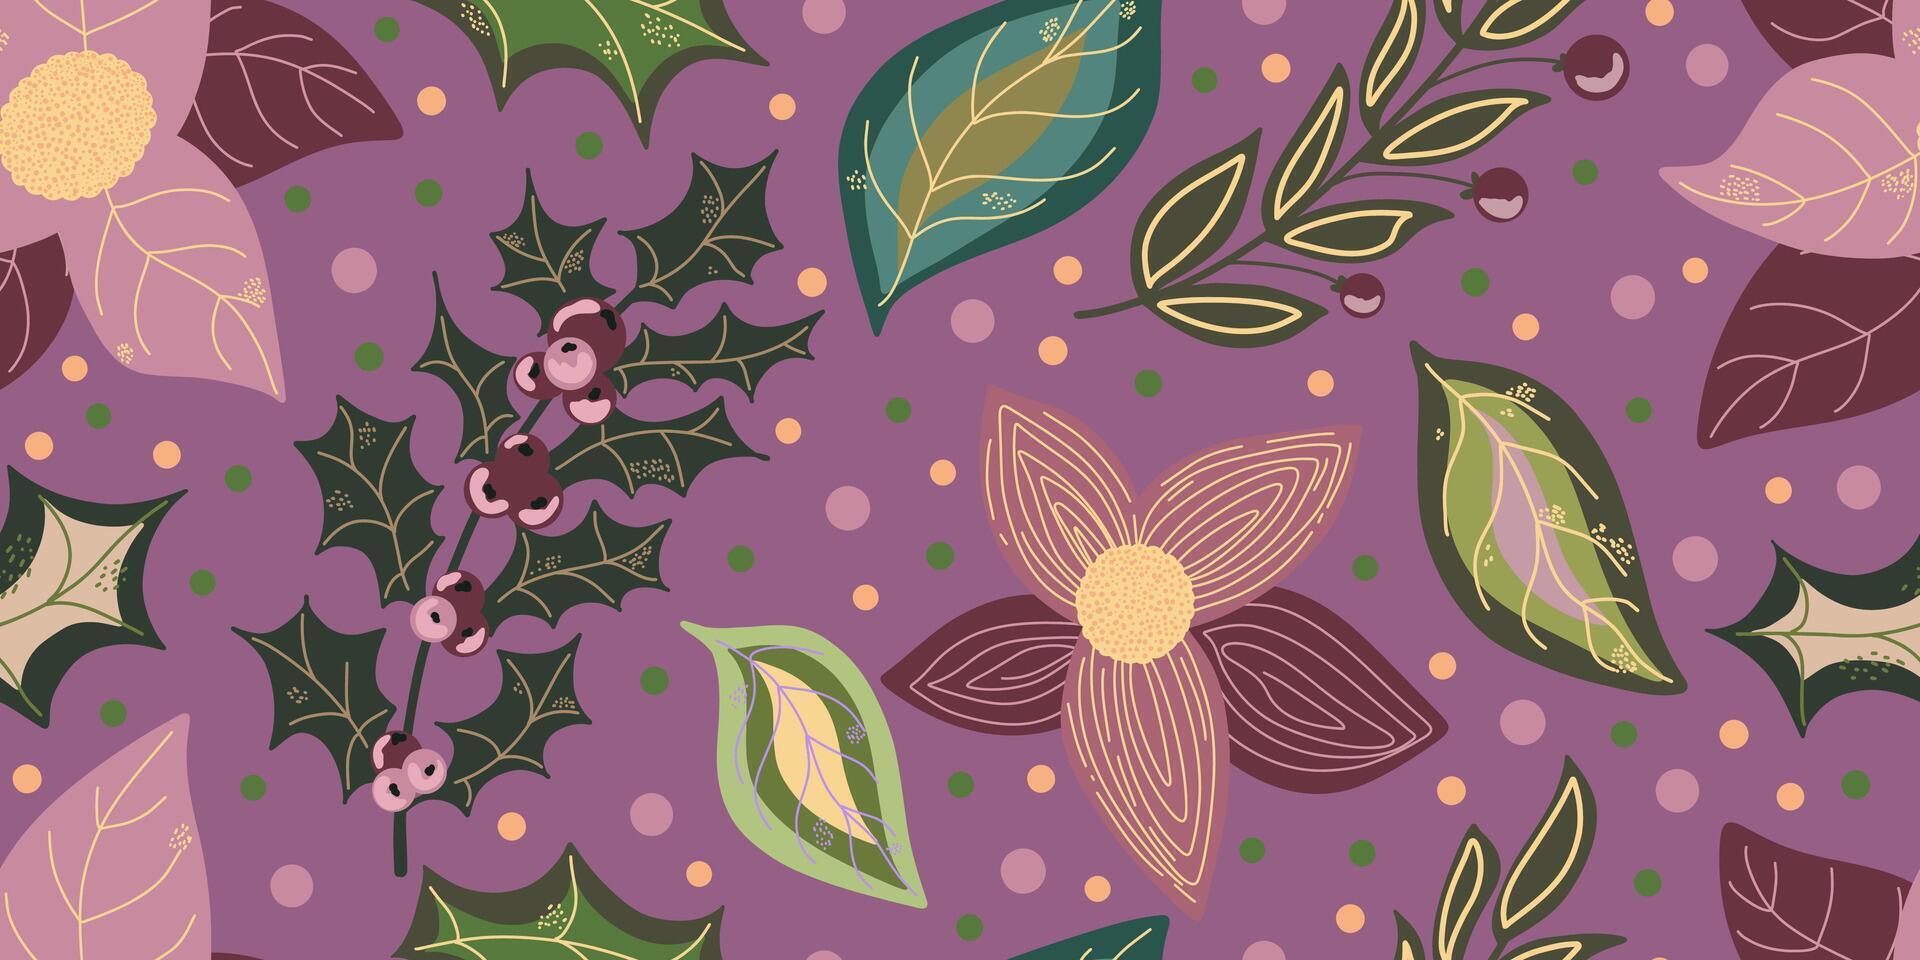 a purple floral pattern with leaves and berries vector